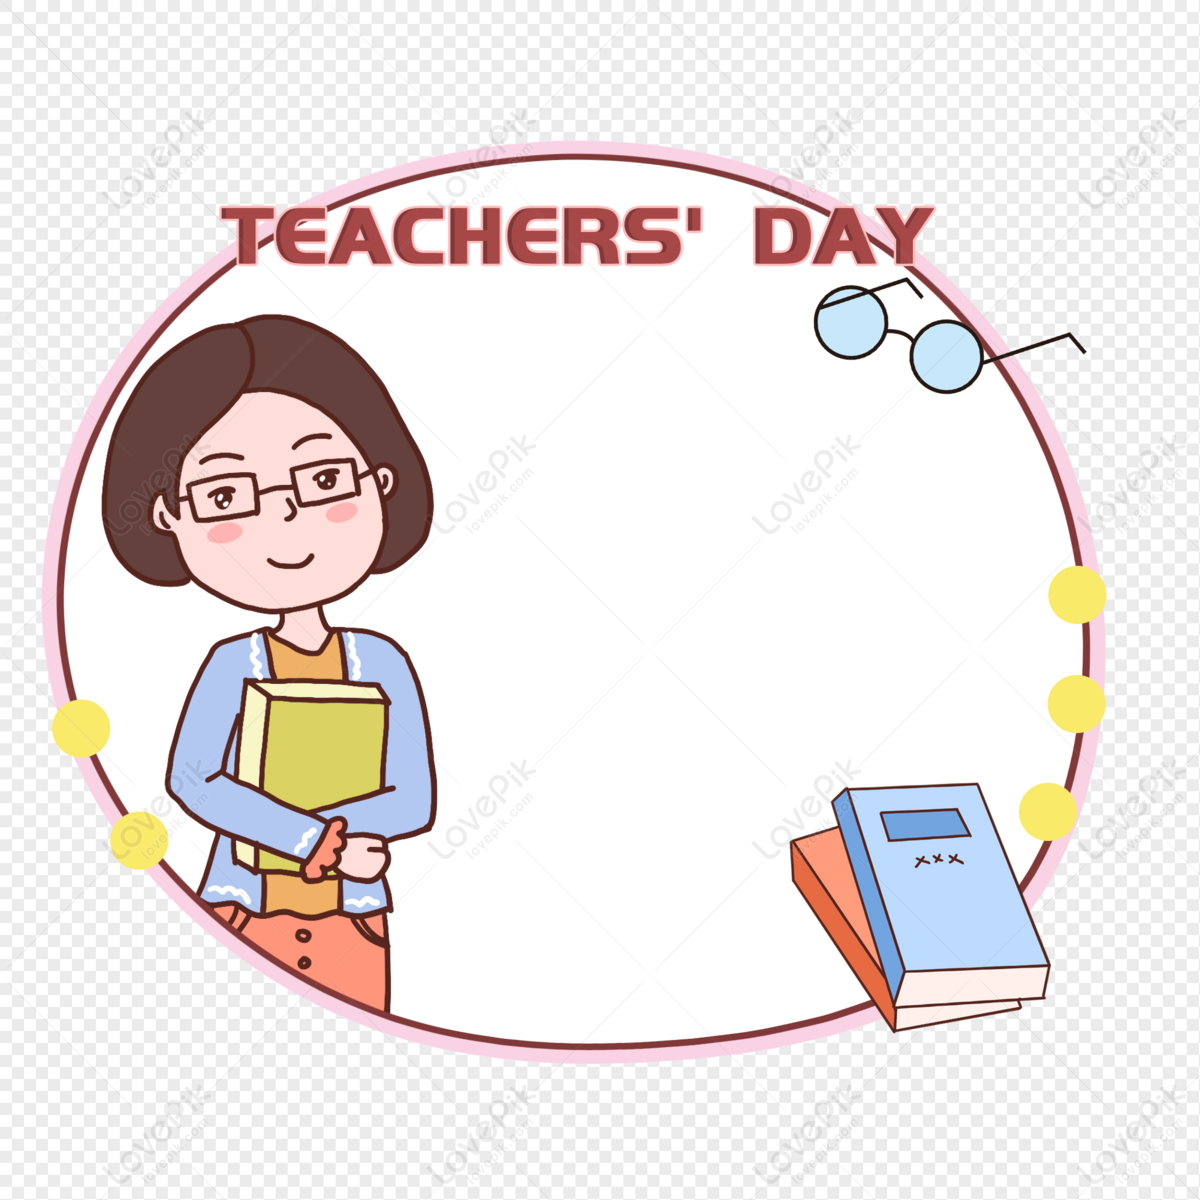 Cartoon Teachers Day Border PNG Transparent Background And Clipart Image  For Free Download - Lovepik | 401608760